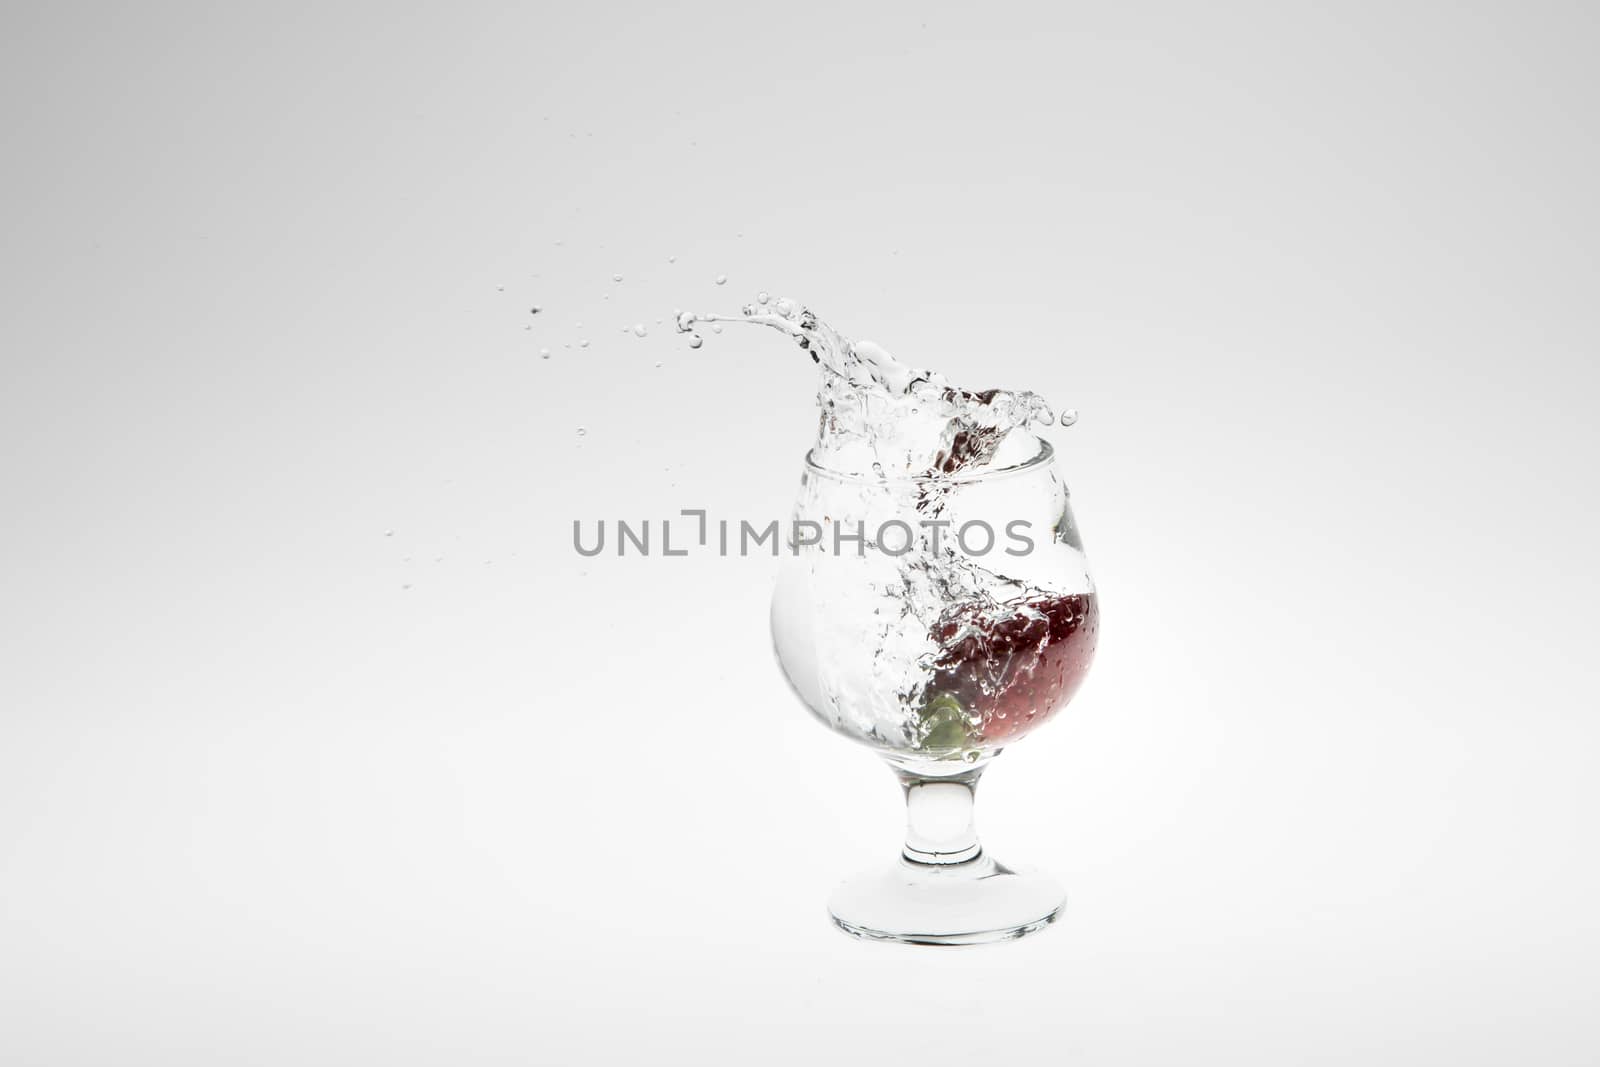 Red strawberry inside flowing water on white background